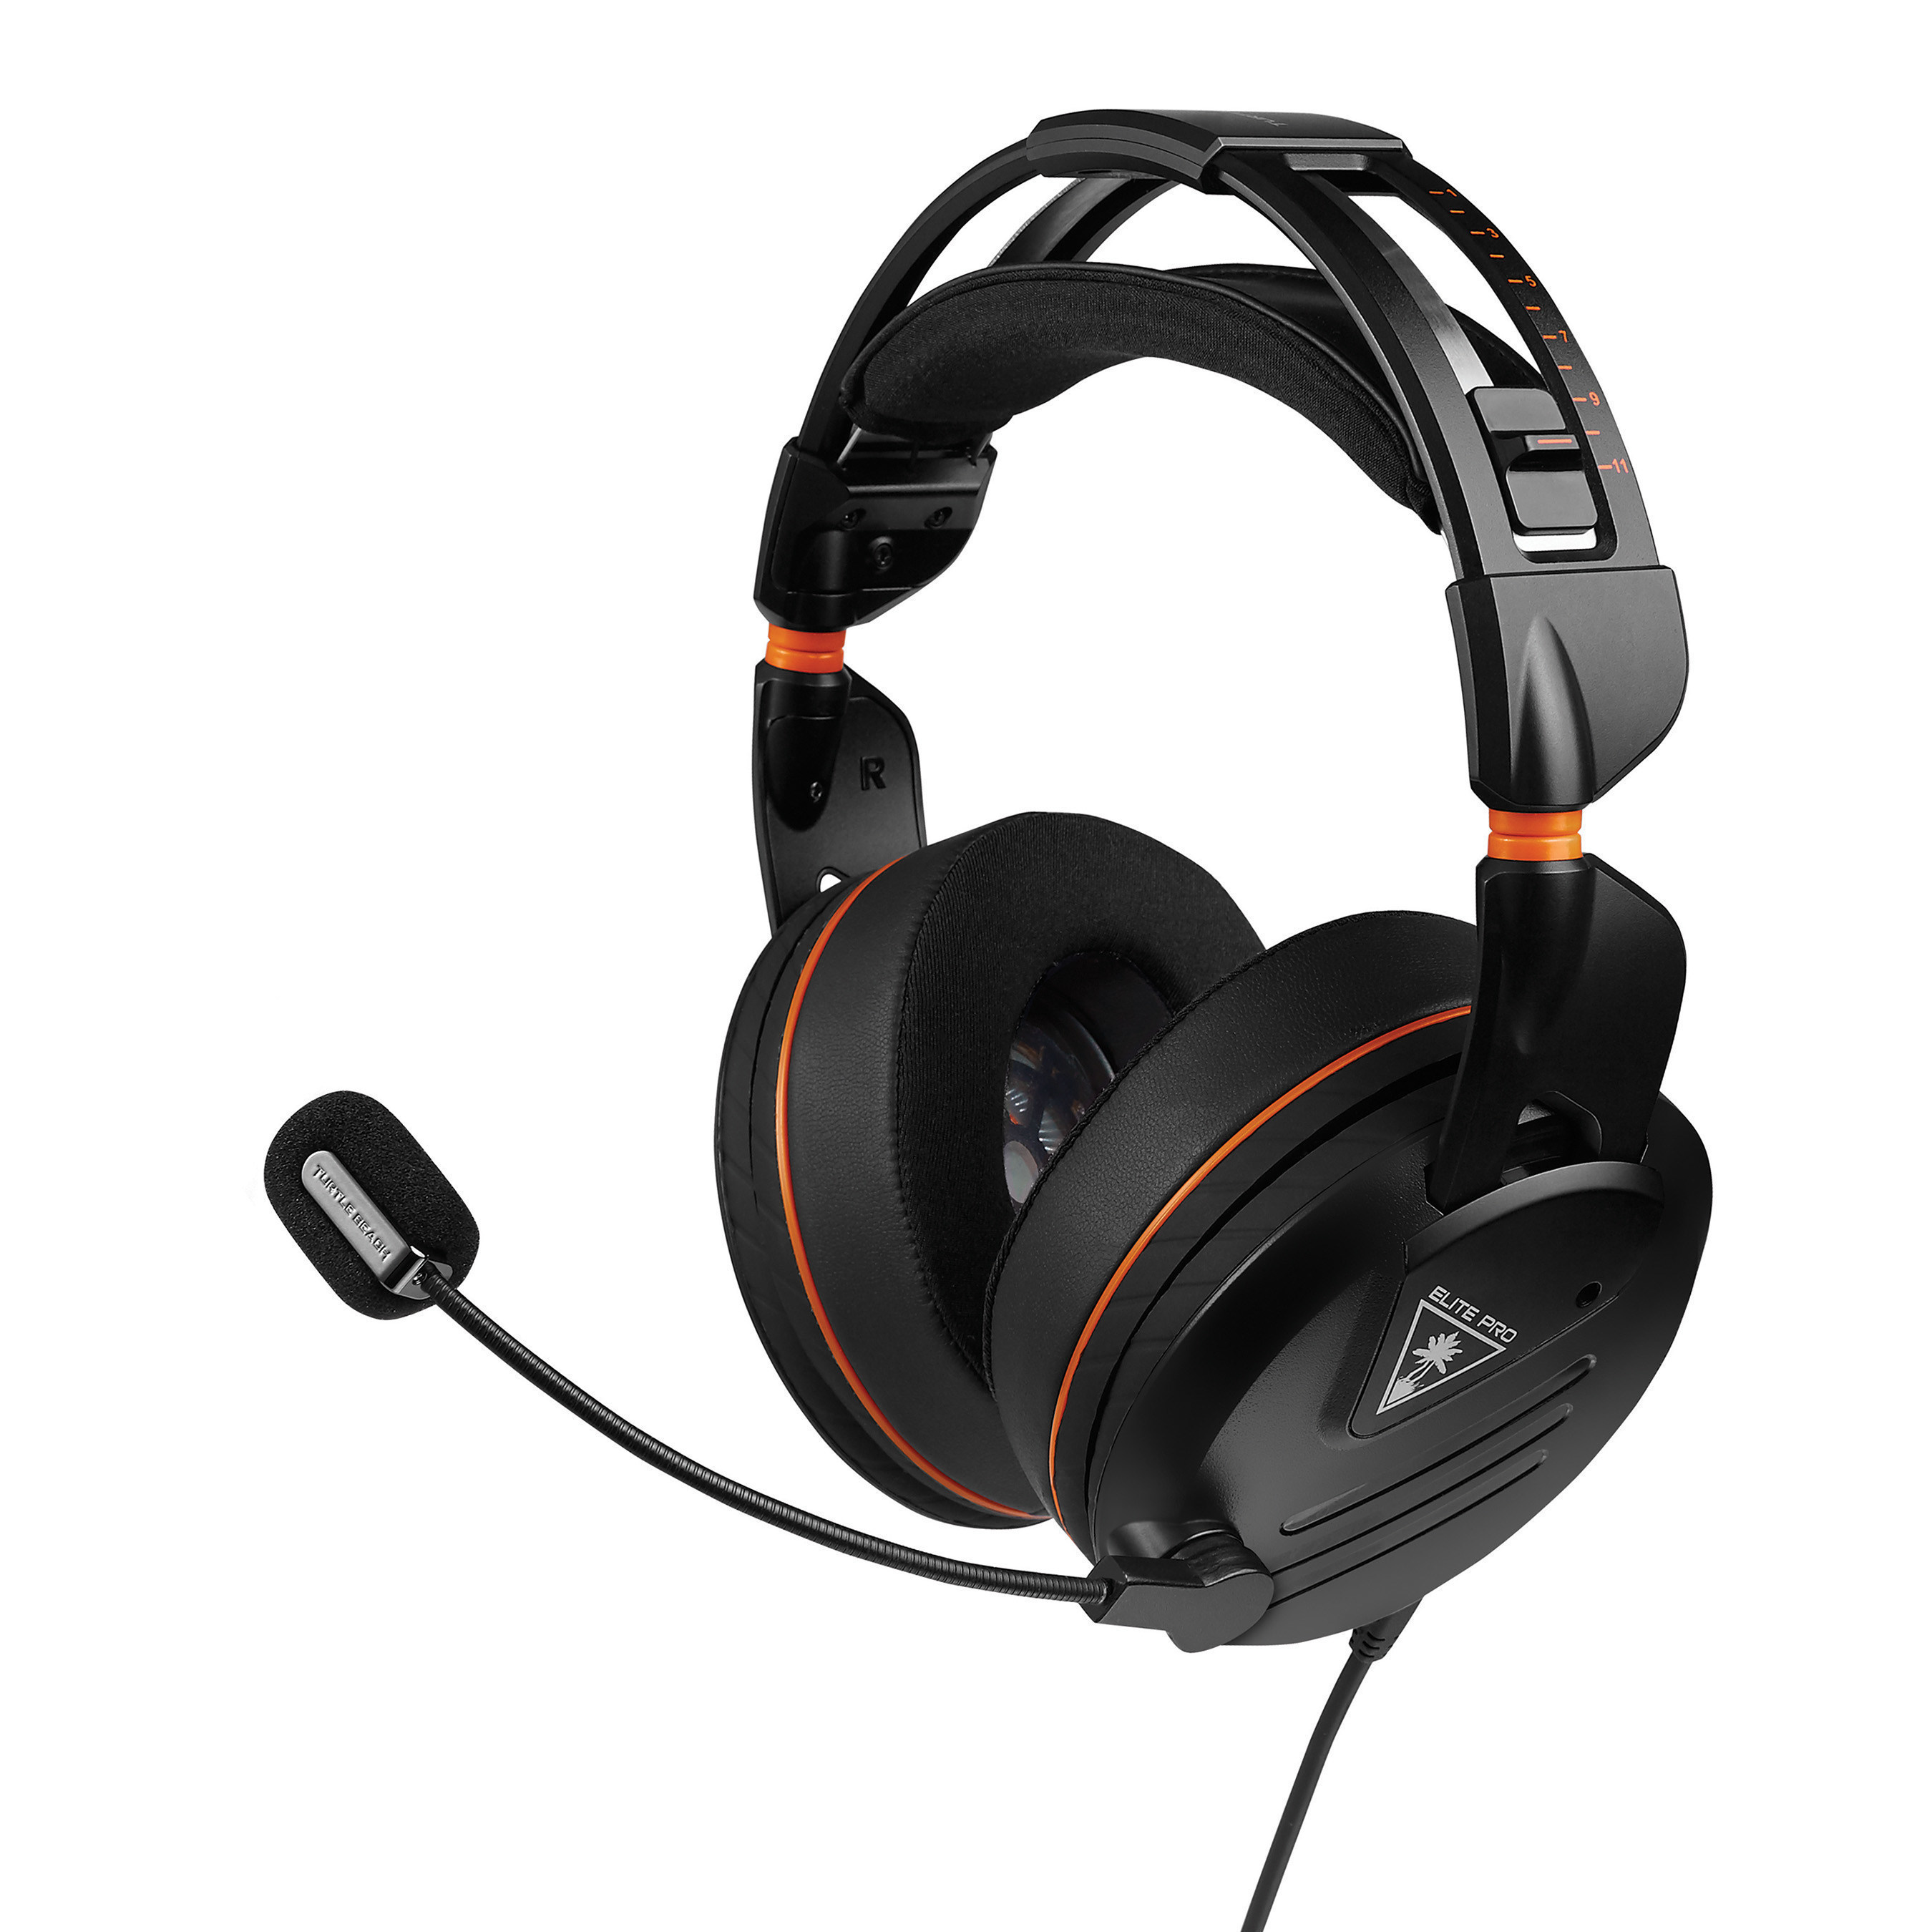 Turtle Beach's all-new Elite Pro Tournament Gaming Headset sets the new benchmark for competitive gaming audio performance and comfort.